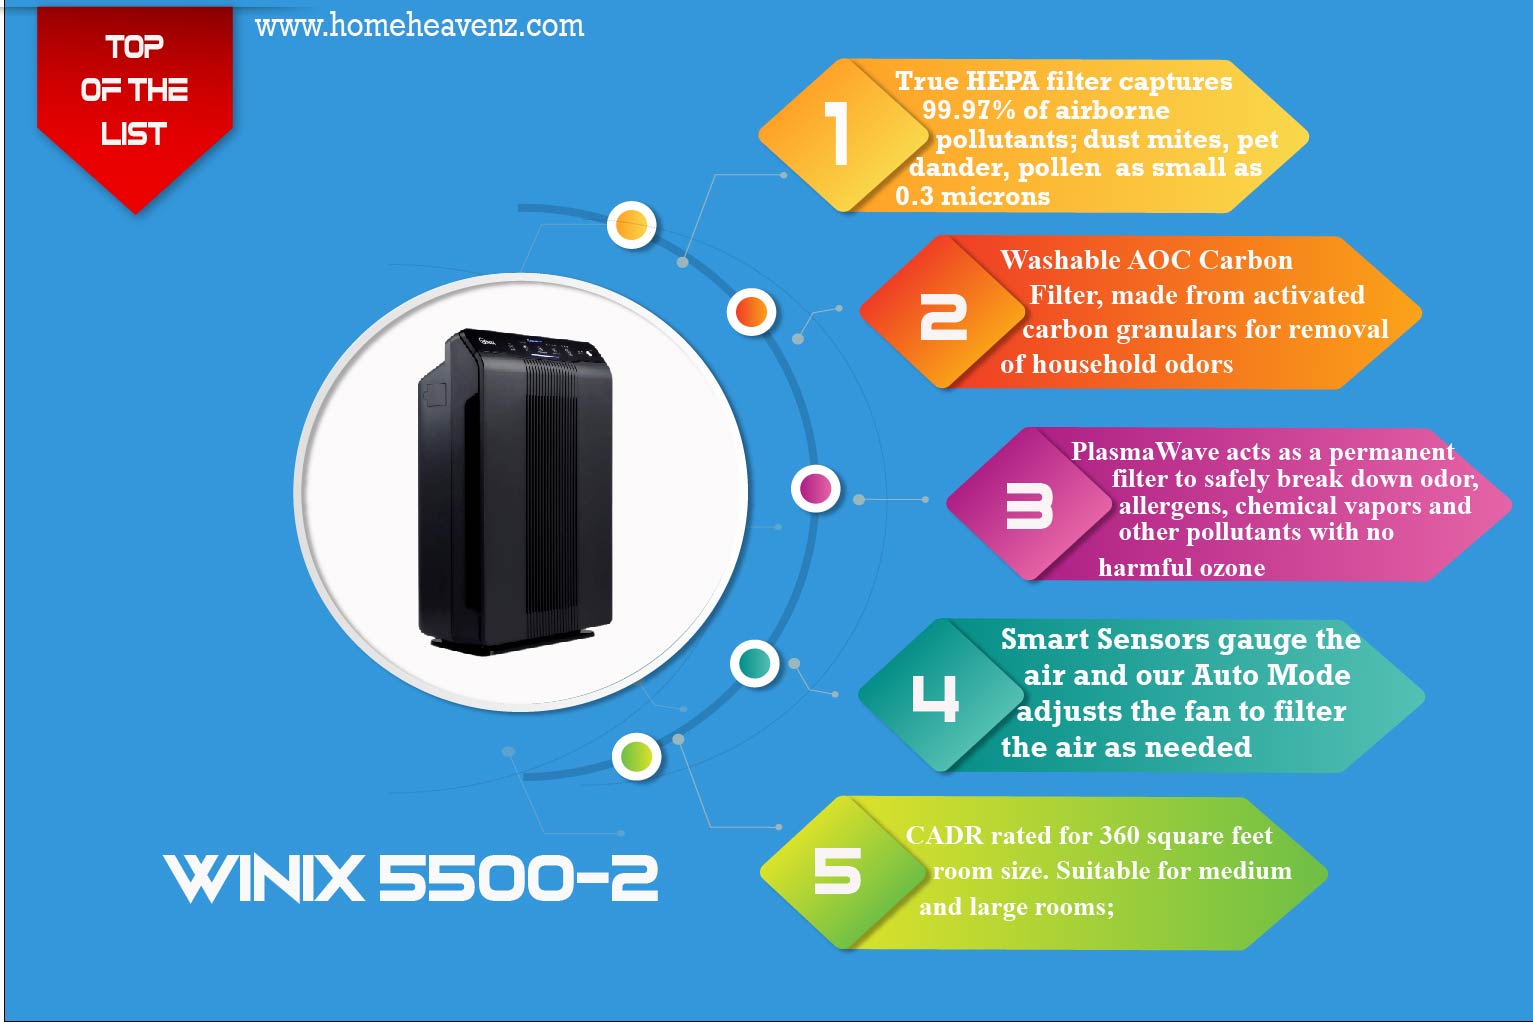 inforgraphic-with-detailed-features-including-true-hepa-filter-carbon-filter-plasma-wave-technology-smart-sensors-cadr-rating-of-Winix-5500-2 – Best-Air-Purifier-with-washable-filter